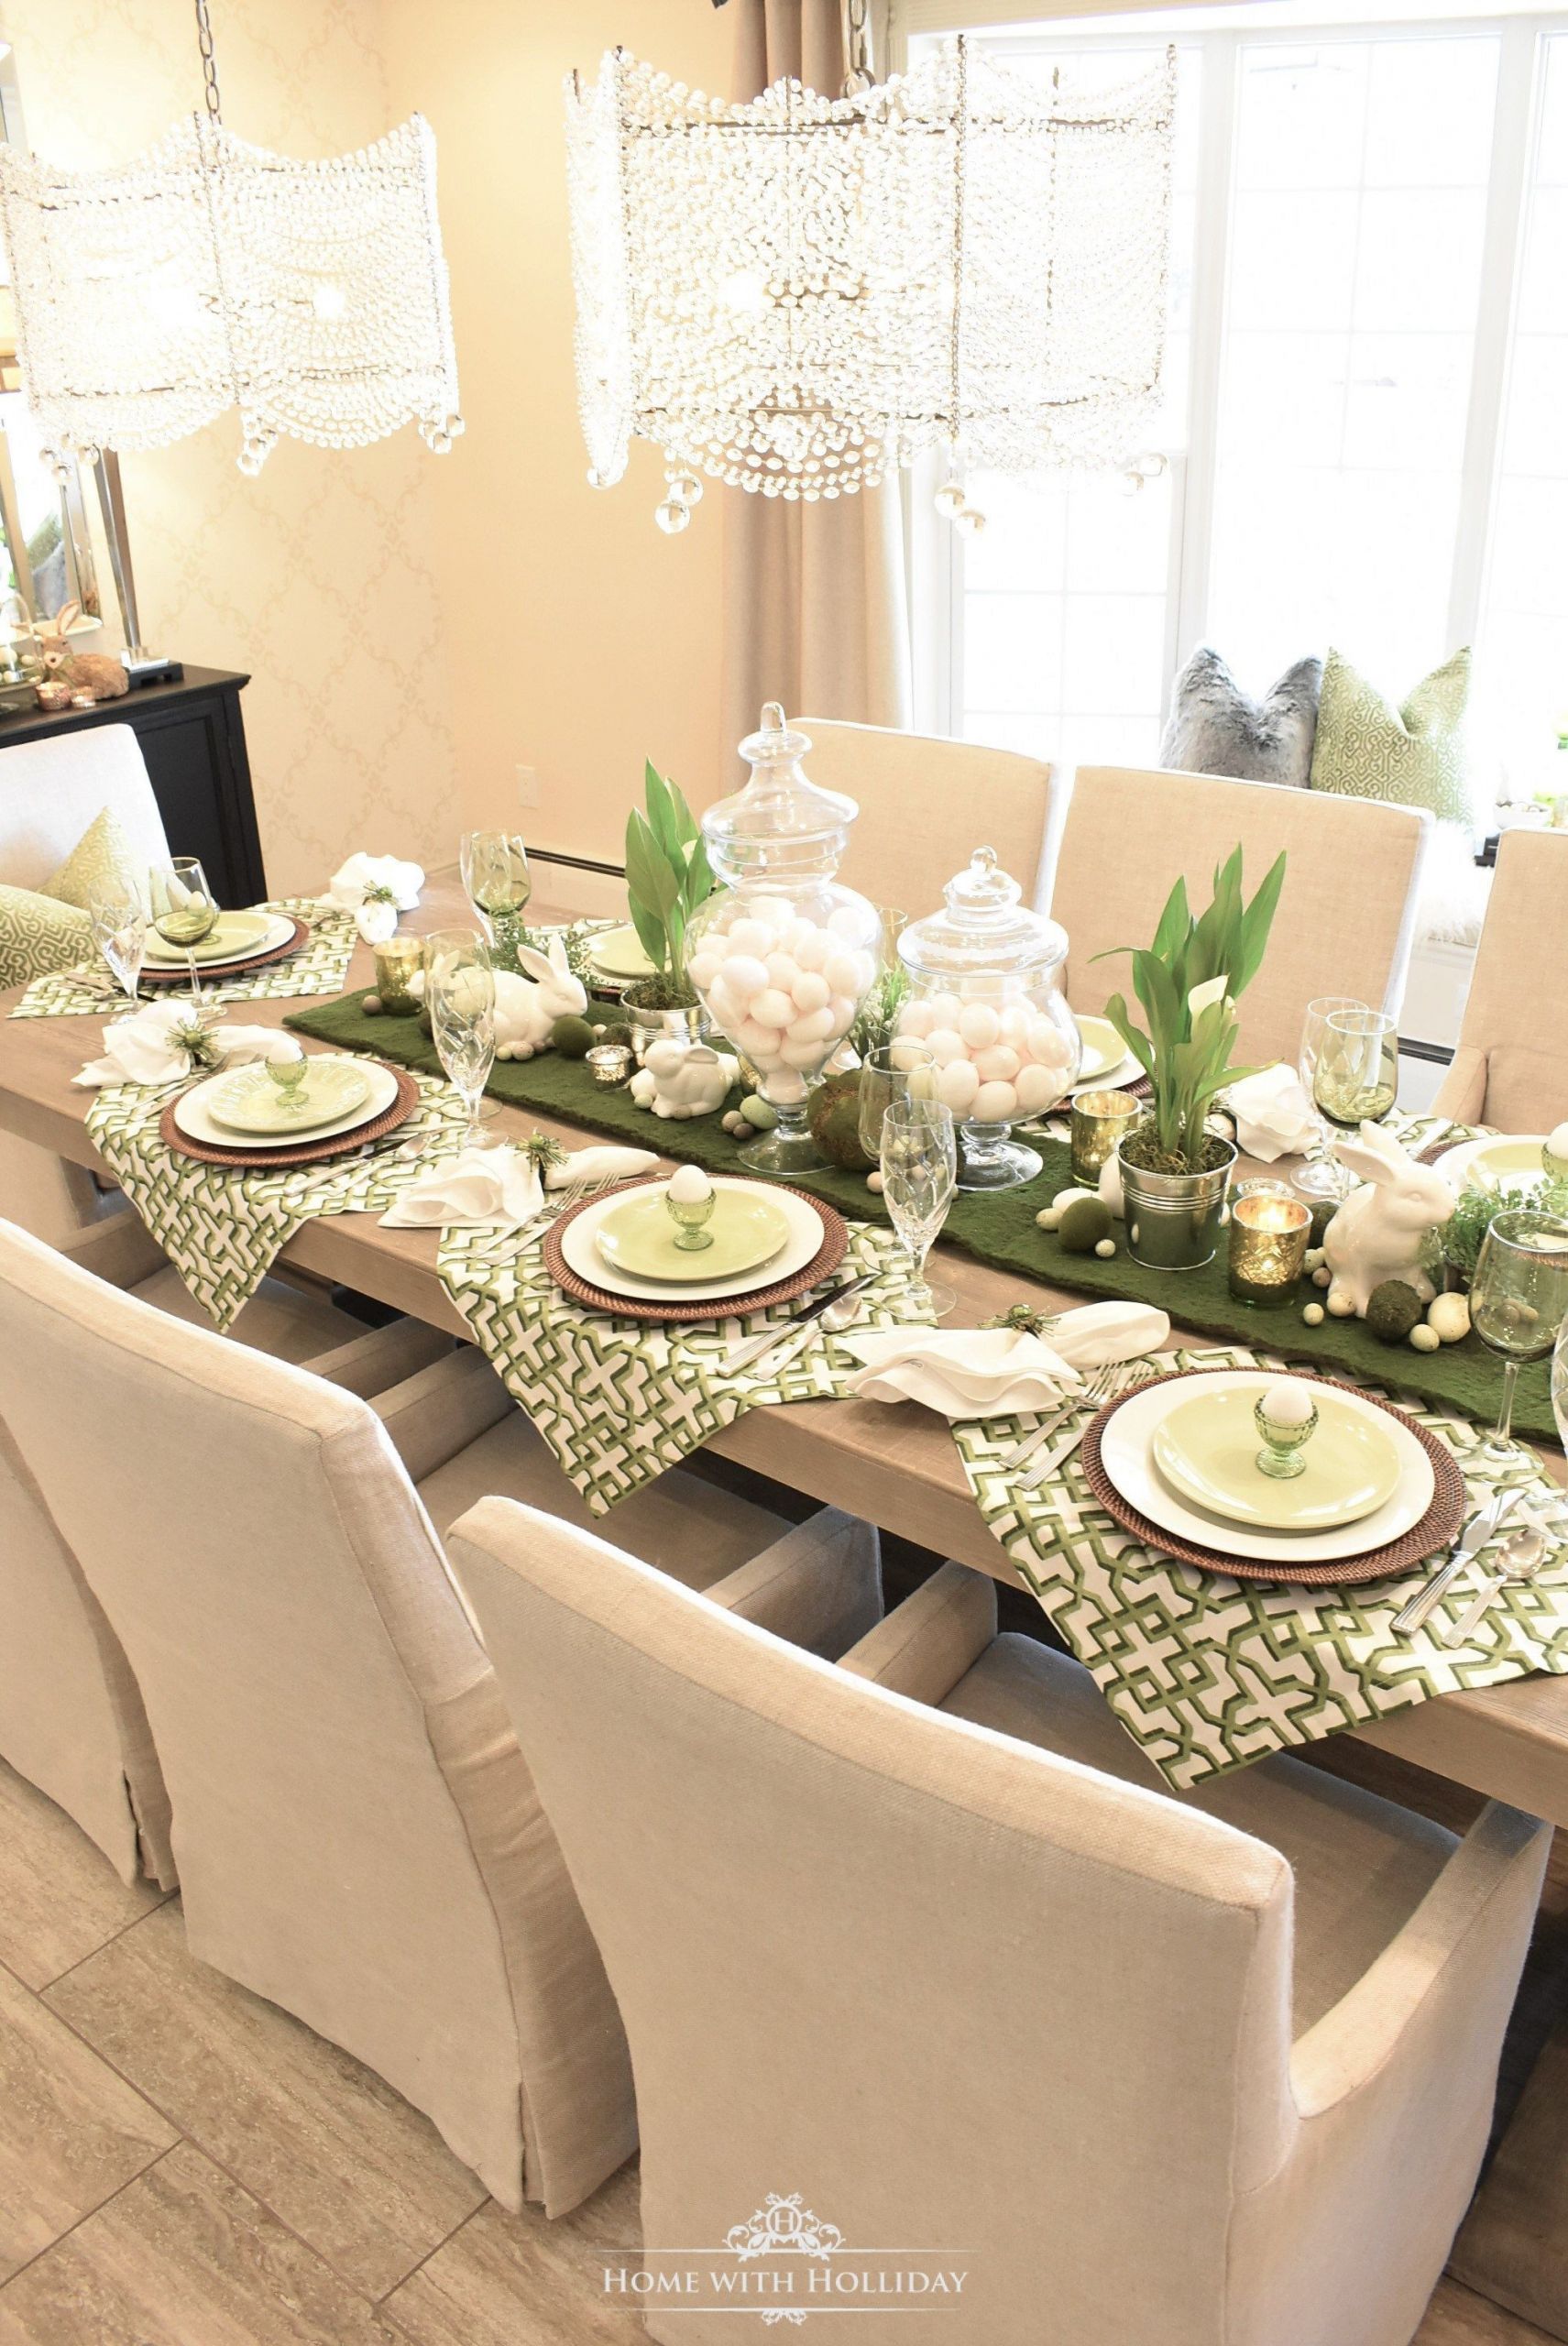 Easter Dinner Table Settings Elegant Green and White Easter Table Setting Home with Holliday